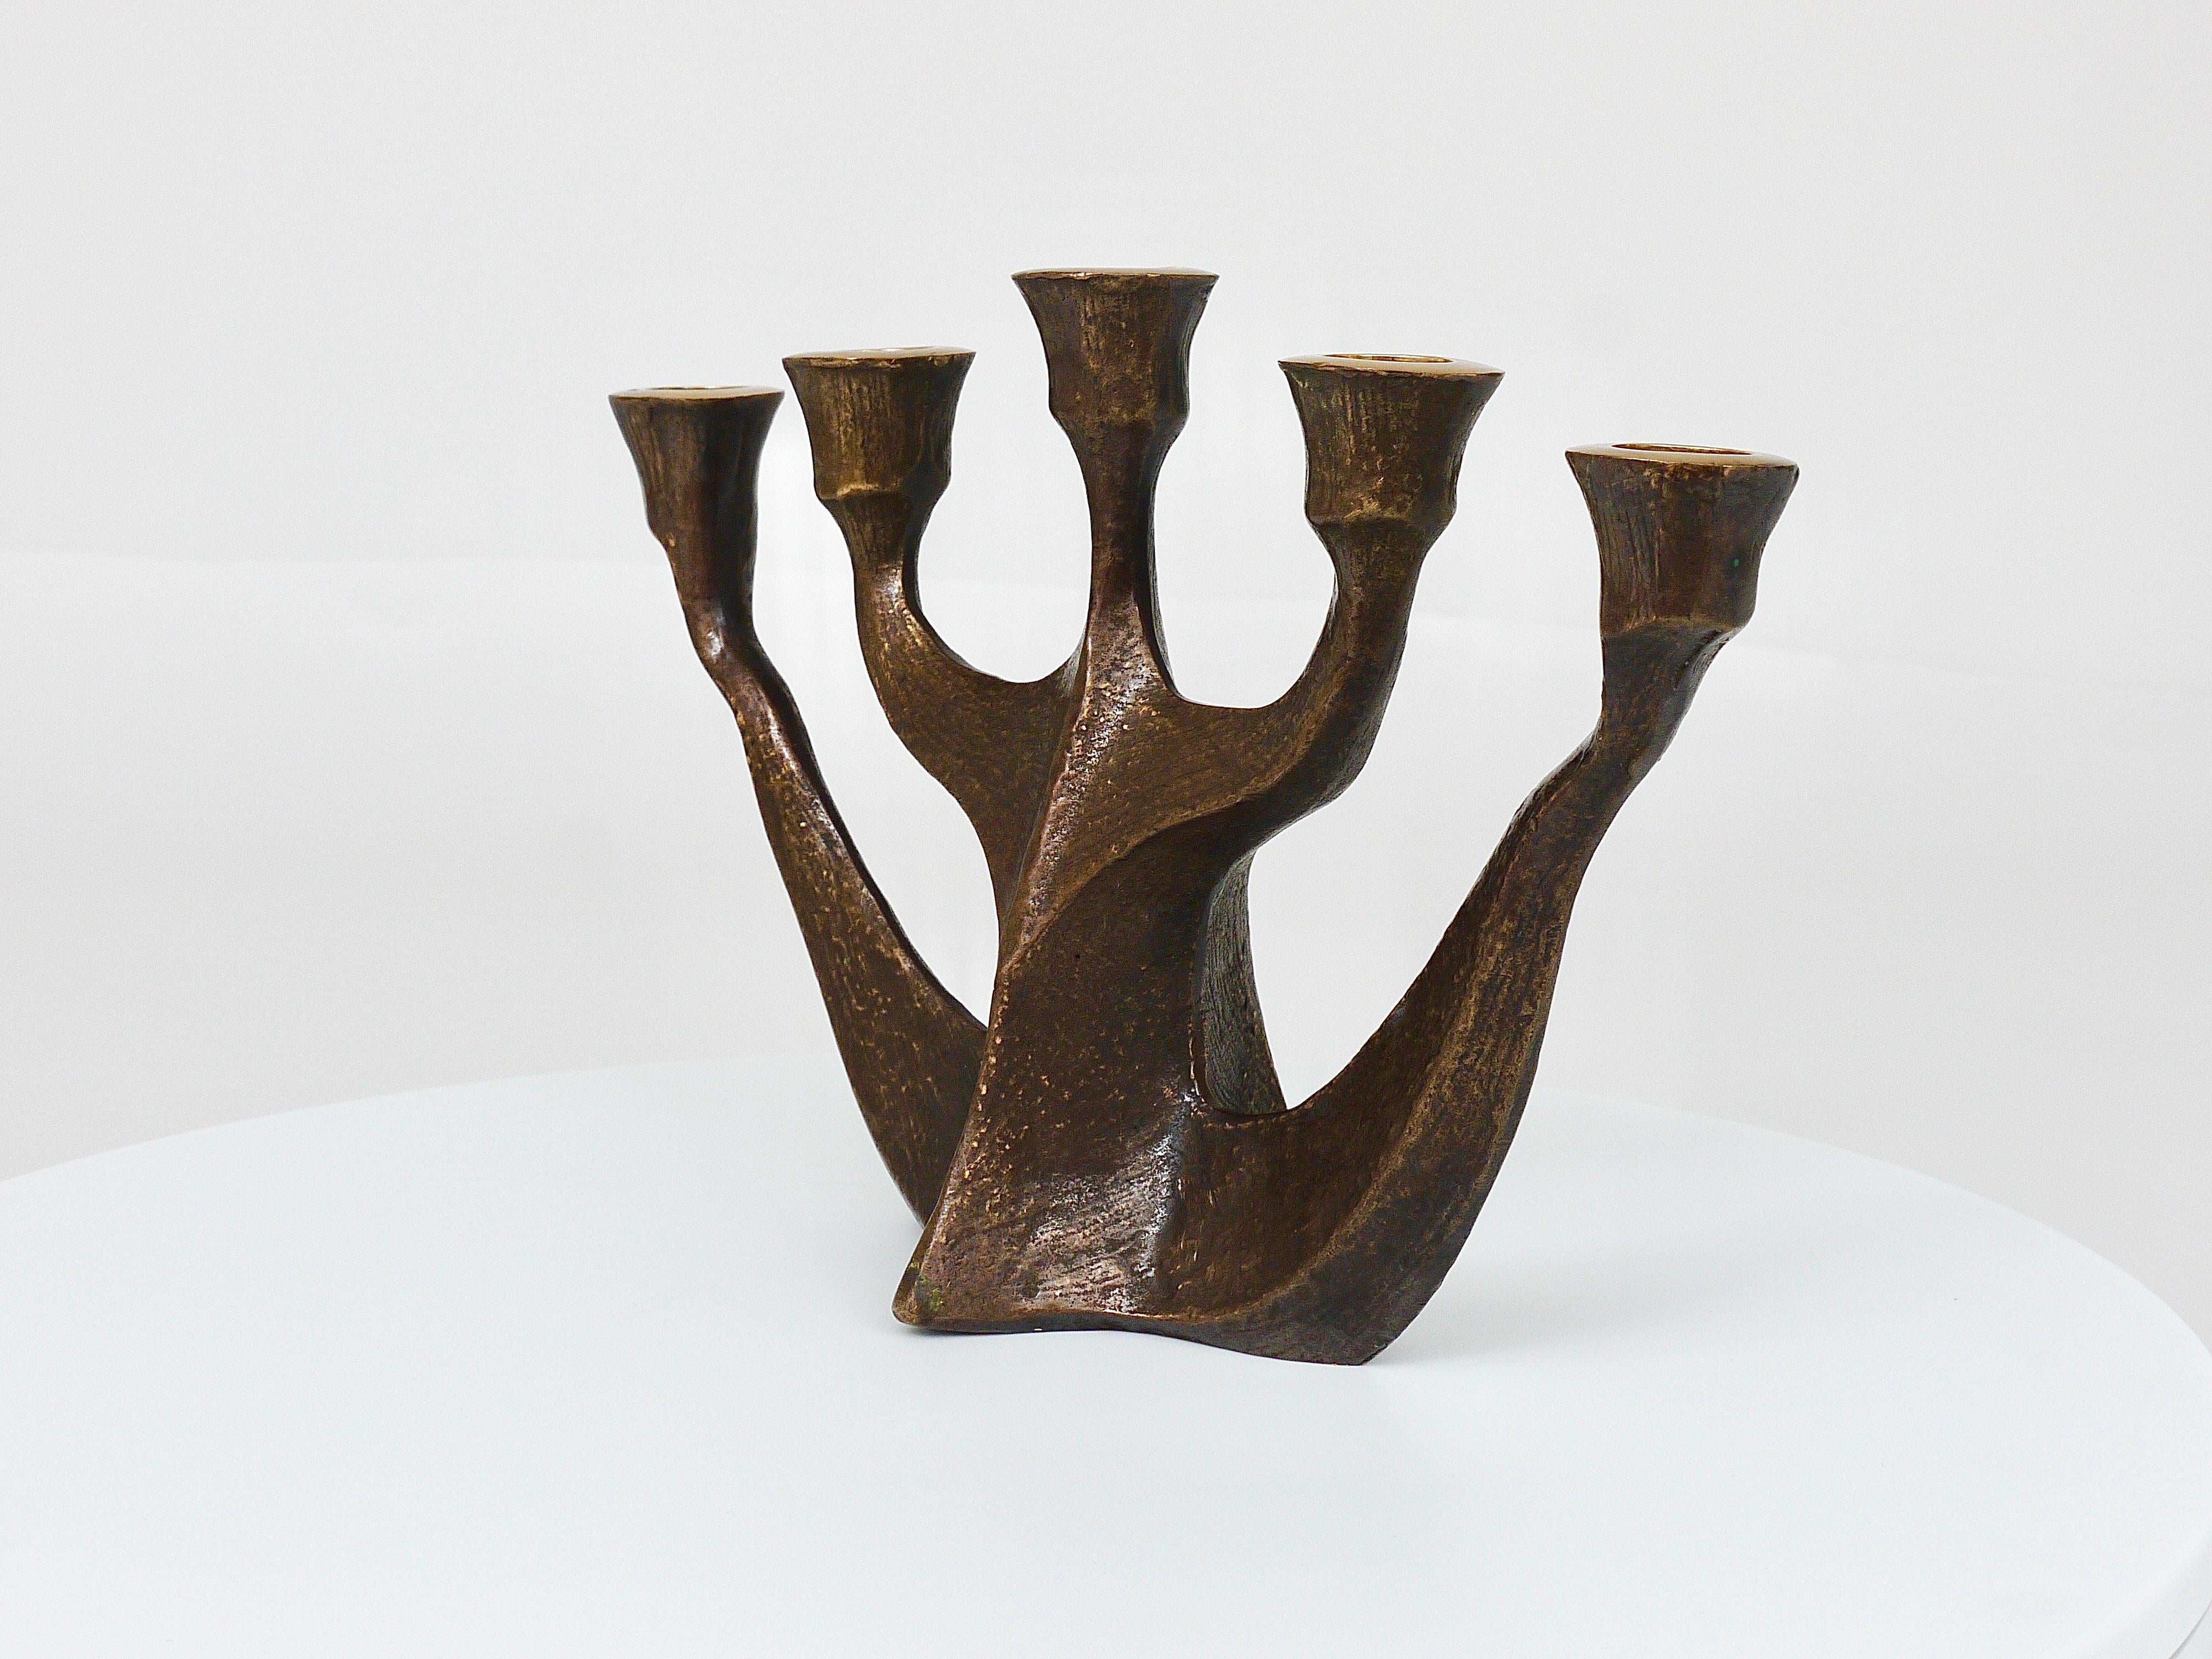 Up to Two Midcentury Brutalist Bronze Candleholders by Michael Harjes, 1960s For Sale 3